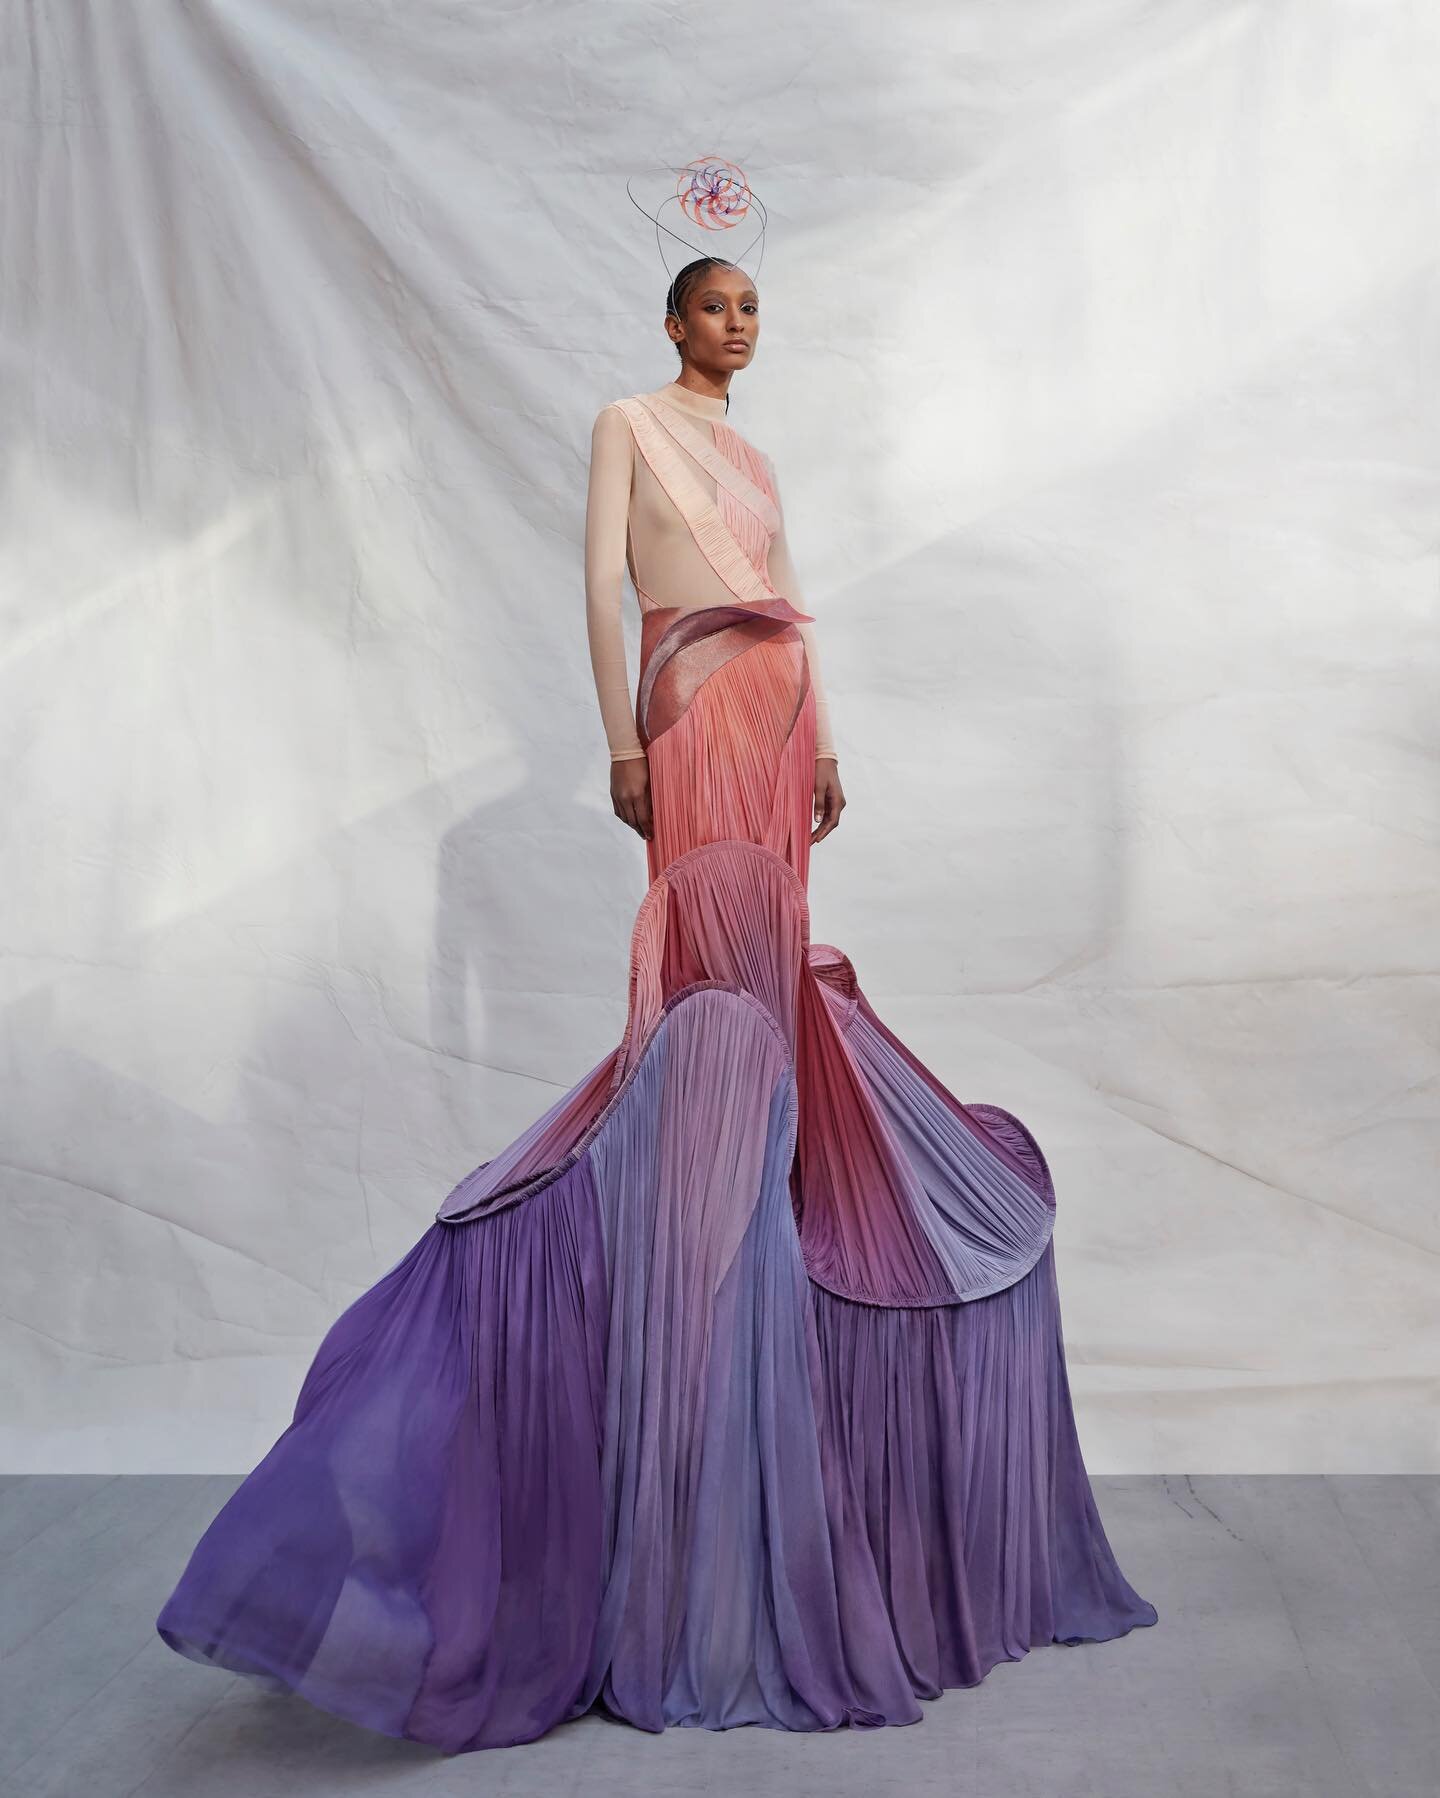 Round 2 - The Turbine Look🌪: Kitan wears top and skirt draped from hand-dyed cruelty free peace silk 🌪

Thank you to @theperfectmagazine and the team: 
Talent: @kitan.sogo 
Makeup: @kyledominicc MUA assitant: @craighamiltonartistry 
Hair: @palberda